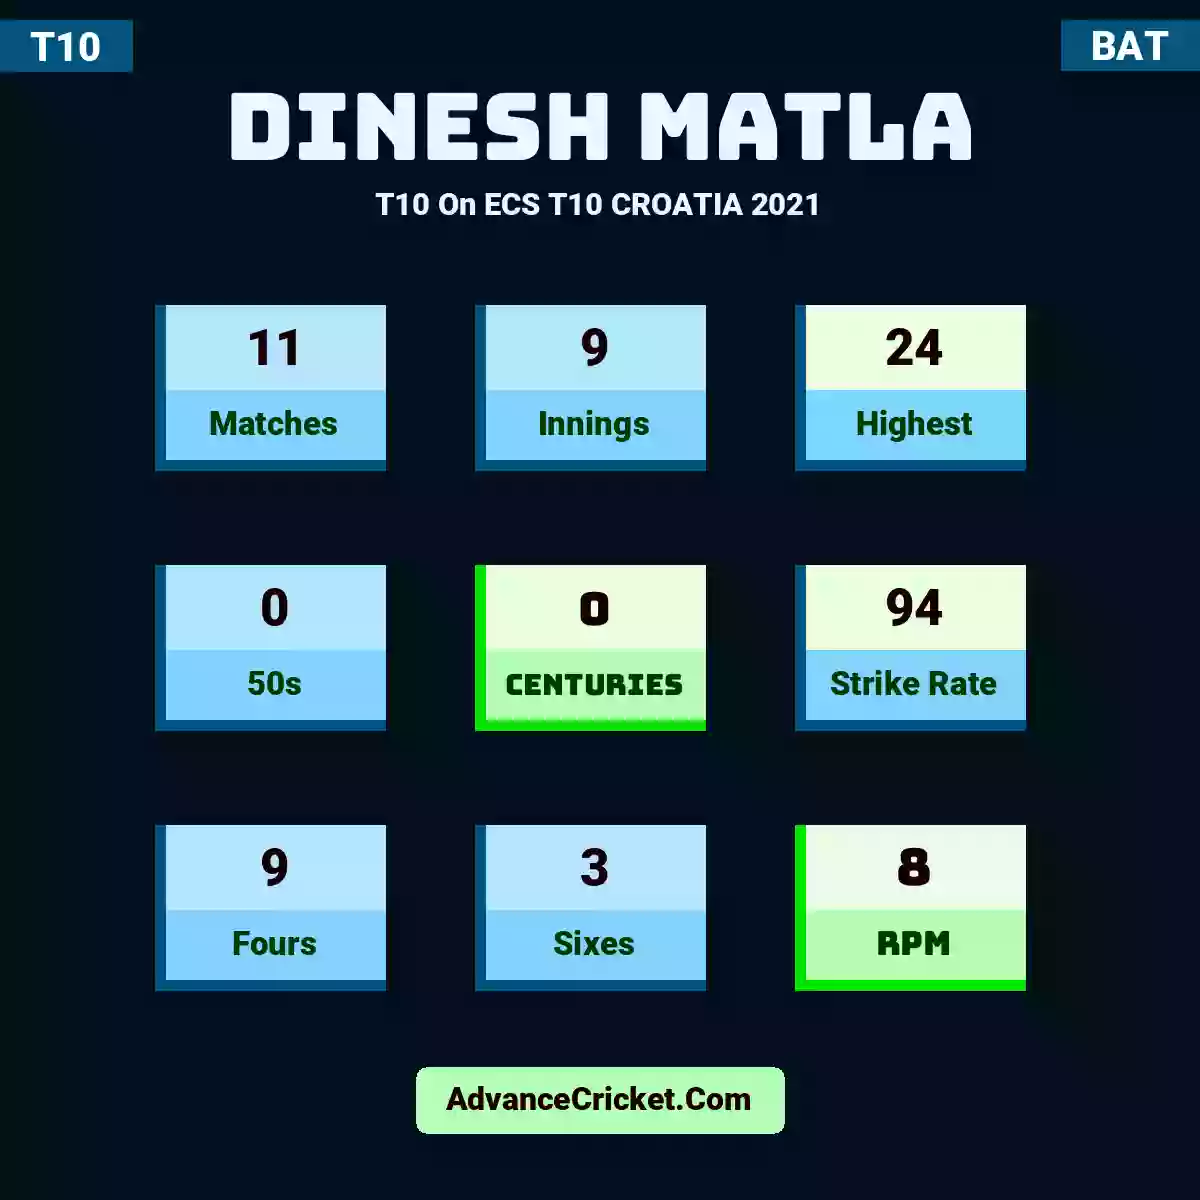 Dinesh Matla T10  On ECS T10 CROATIA 2021, Dinesh Matla played 11 matches, scored 24 runs as highest, 0 half-centuries, and 0 centuries, with a strike rate of 94. D.Matla hit 9 fours and 3 sixes, with an RPM of 8.